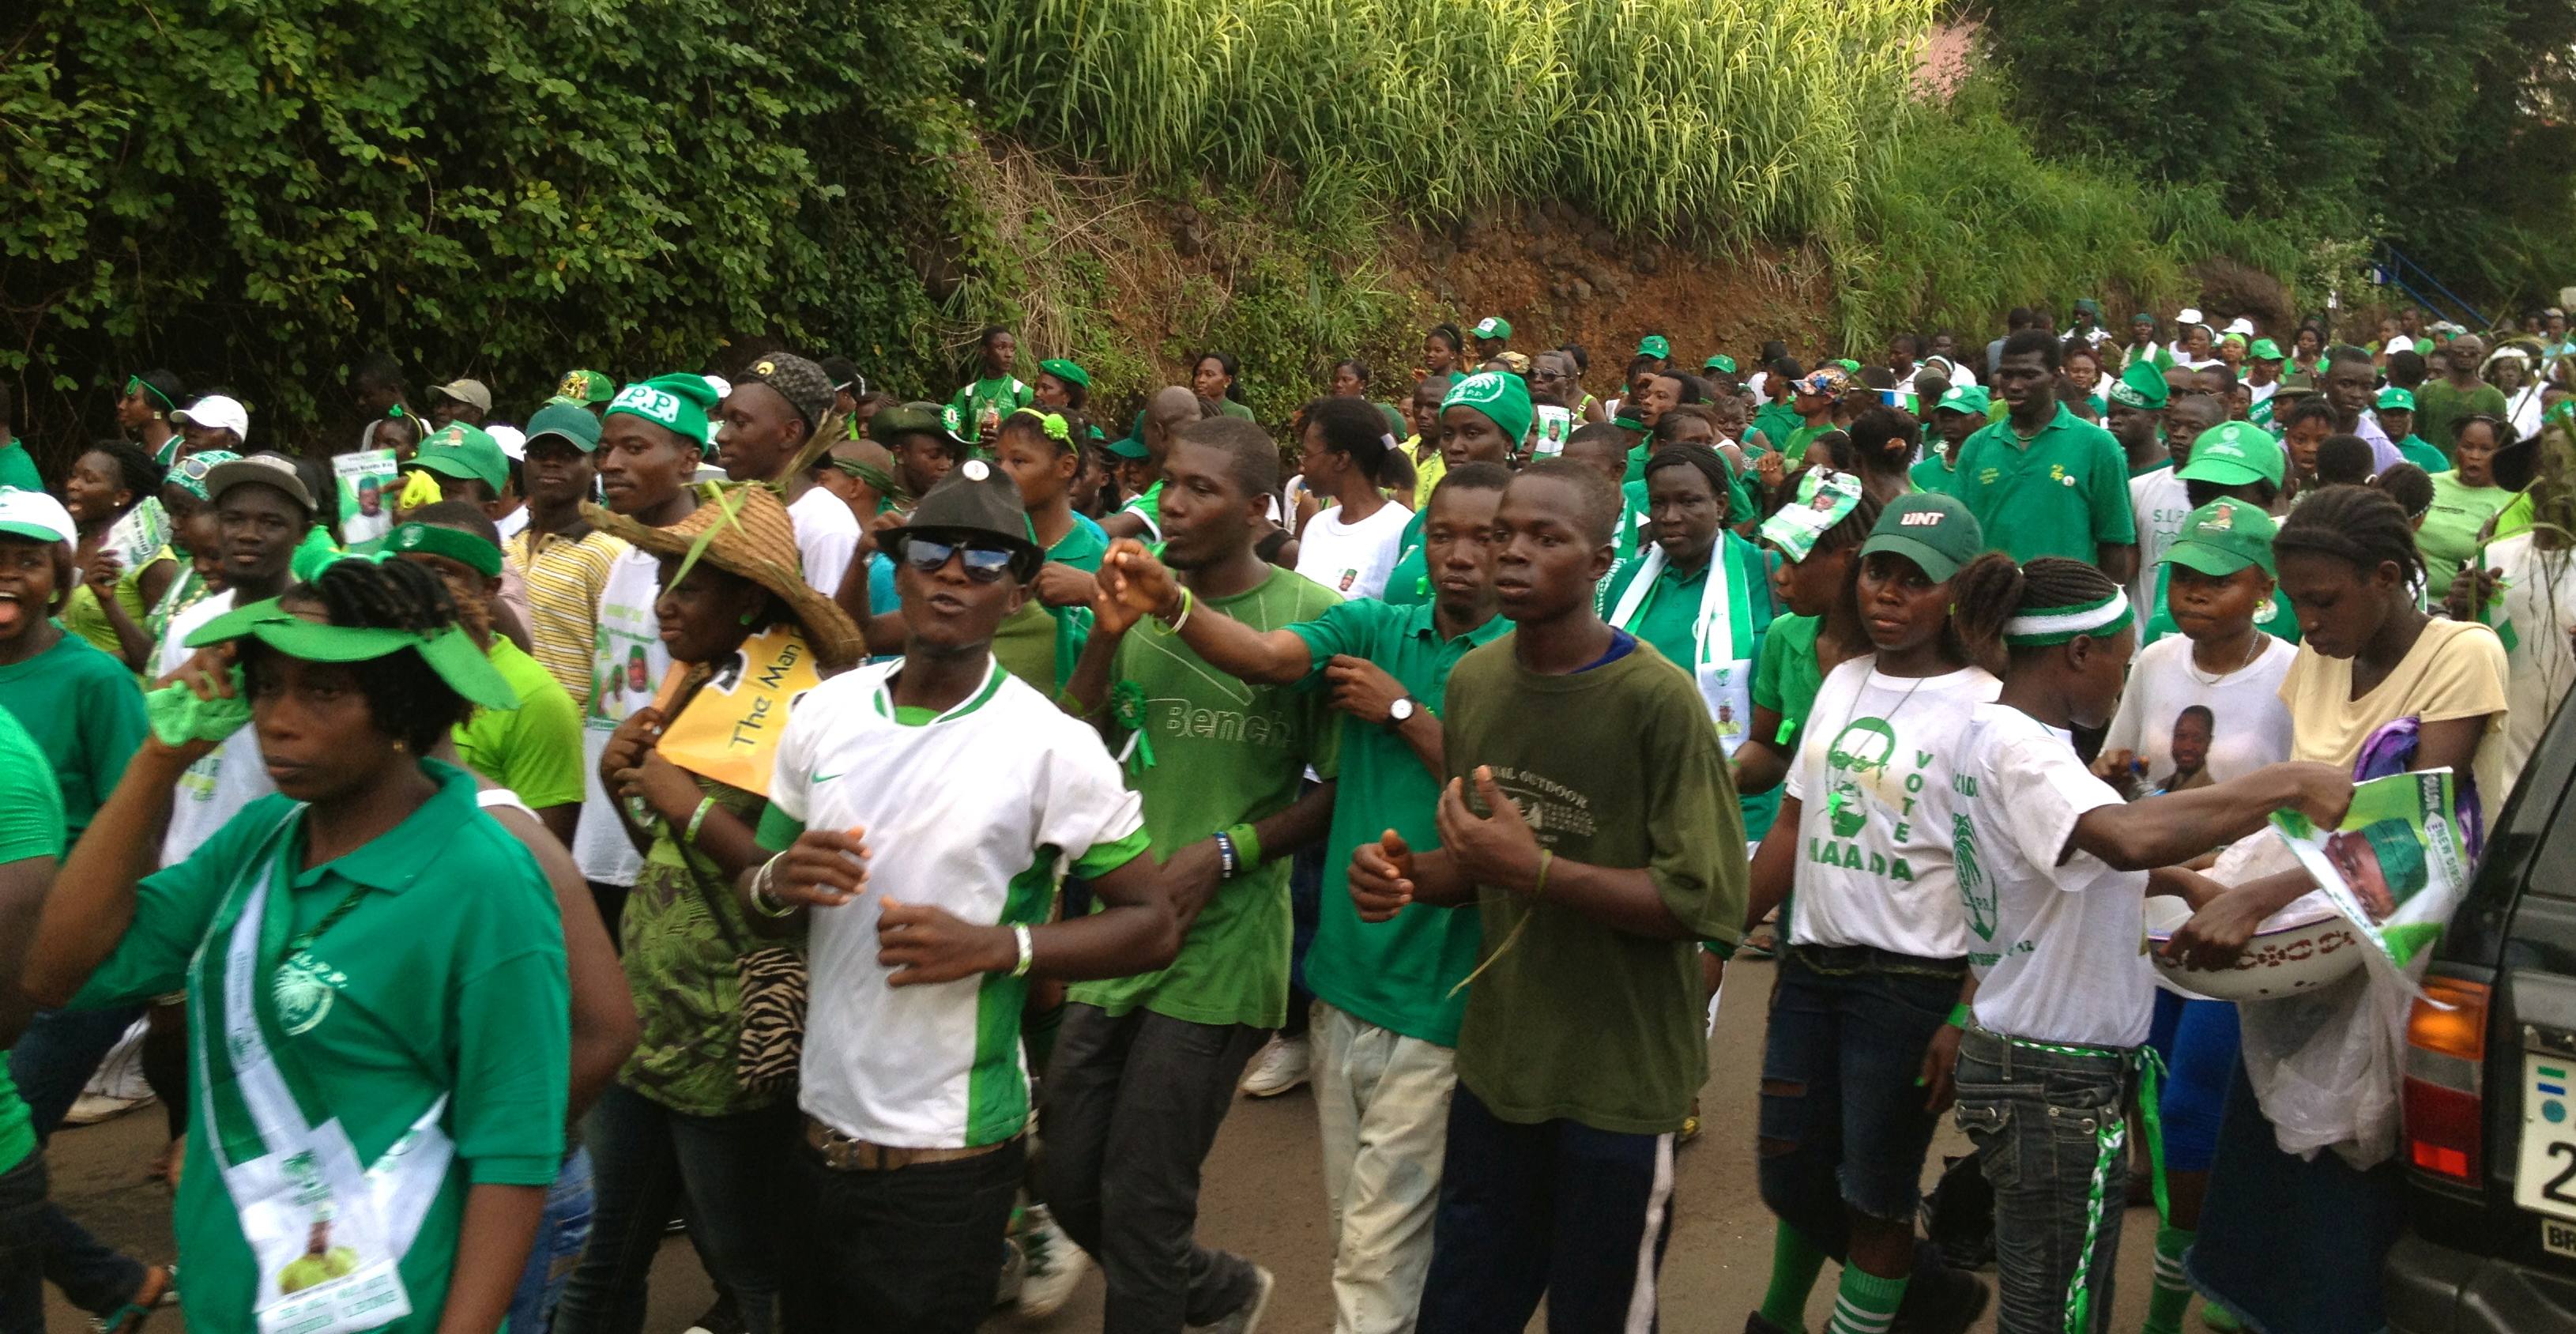 A large group of people wearing green outfits and caps, walking along a road during a rally or parade, holding banners and flags.